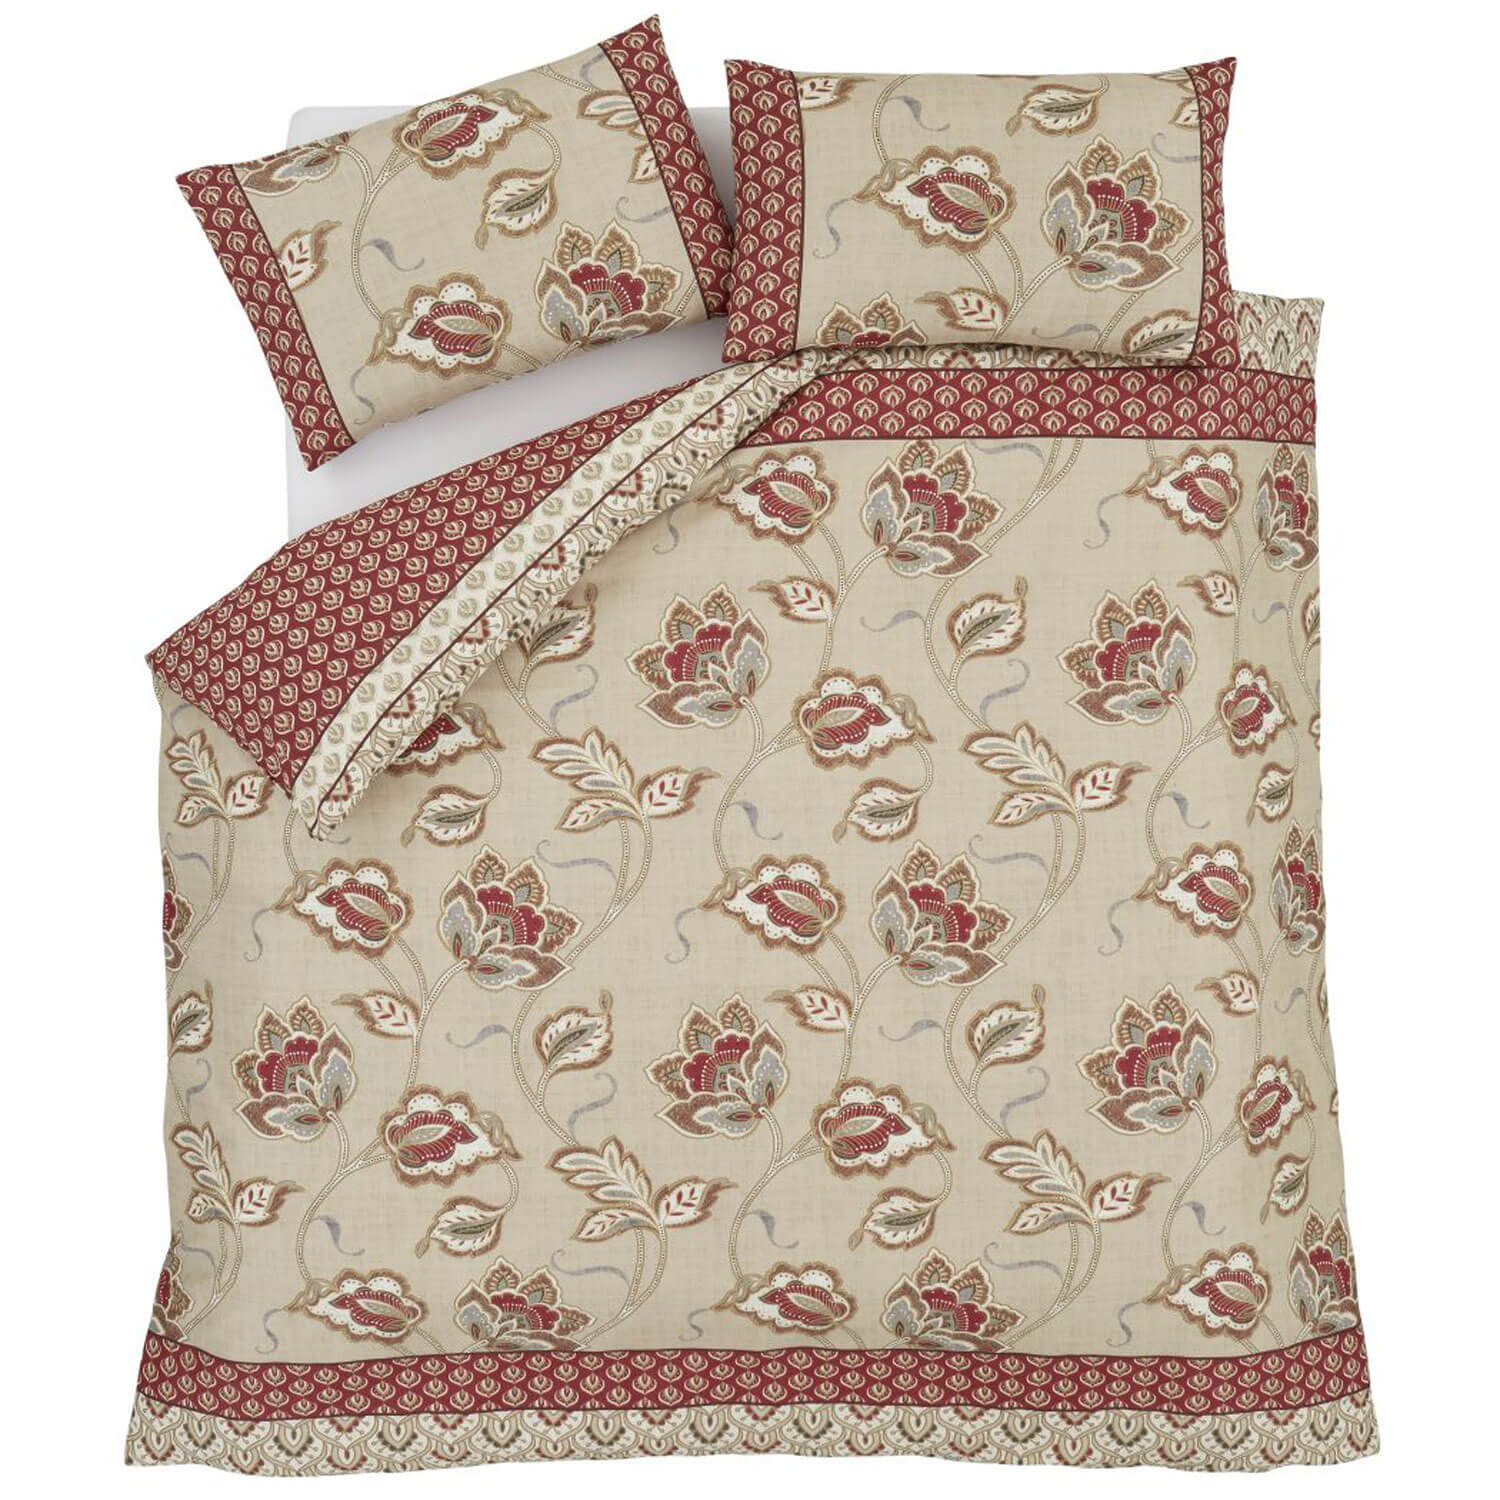  The Home Collection Kashmir Duvet Cover Set 3 Shaws Department Stores